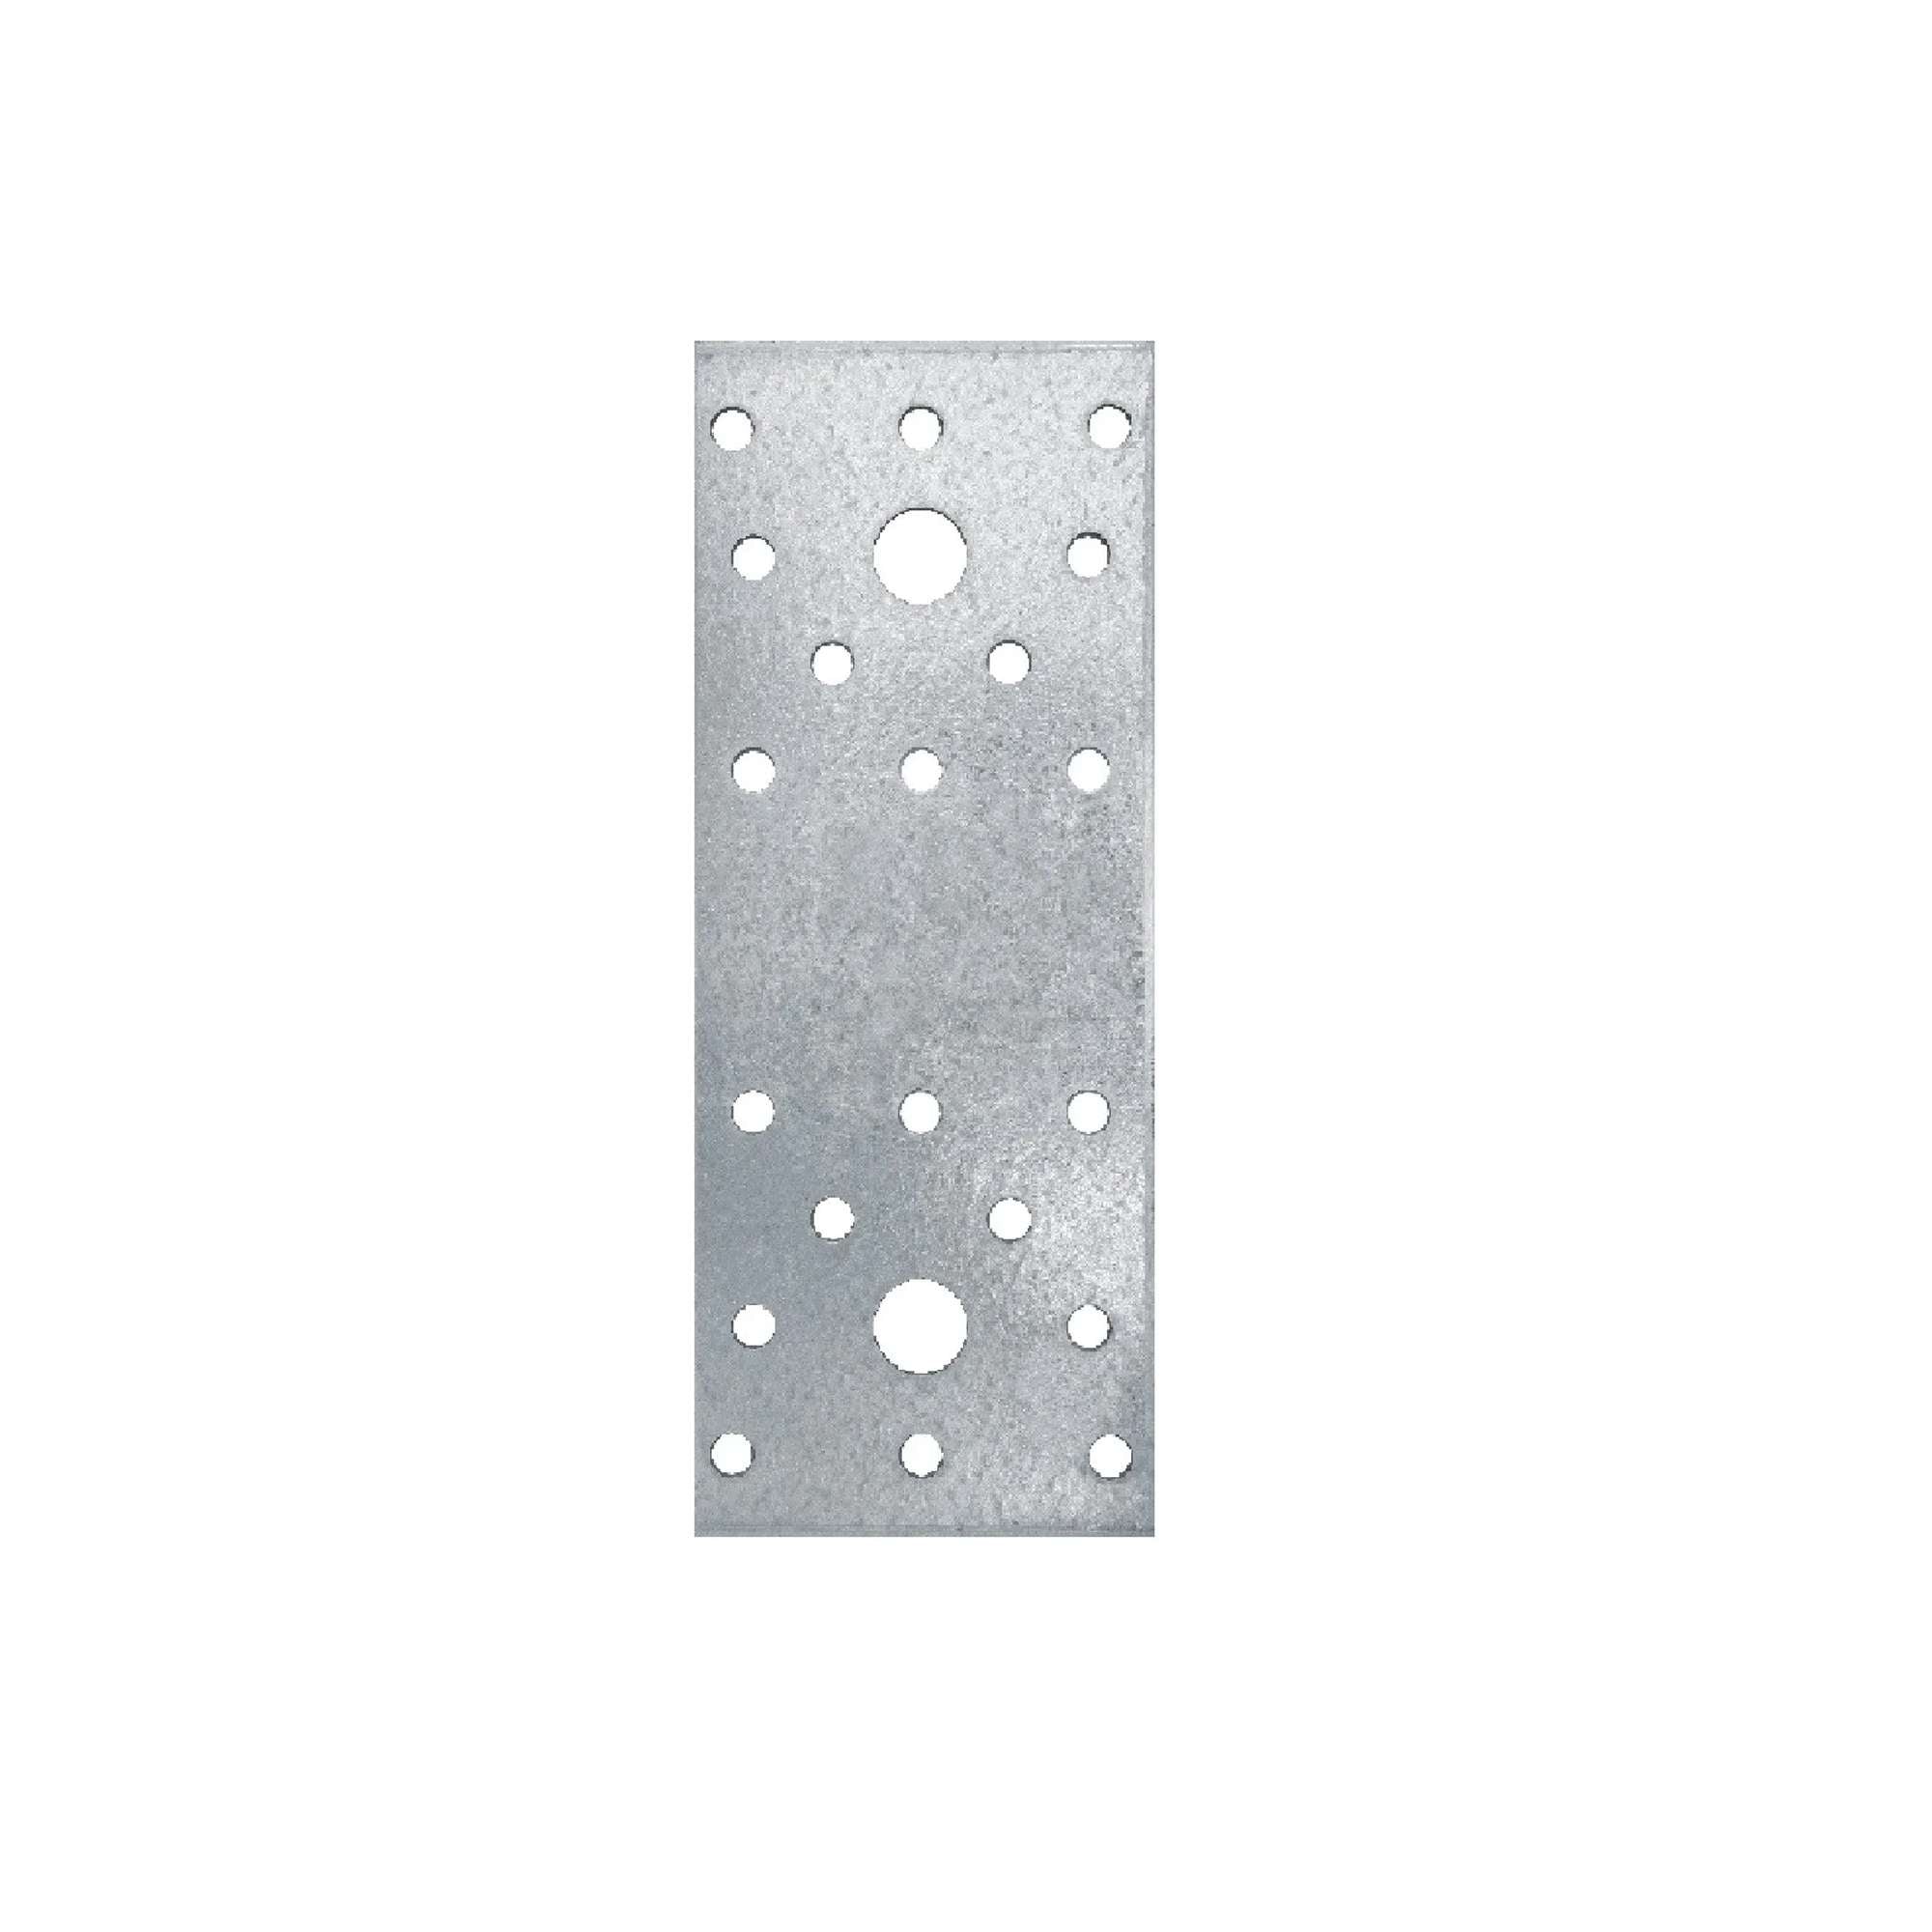 Galvanised screw and nail fixing plate white 50x120 pack.25pcs - 80300B12050